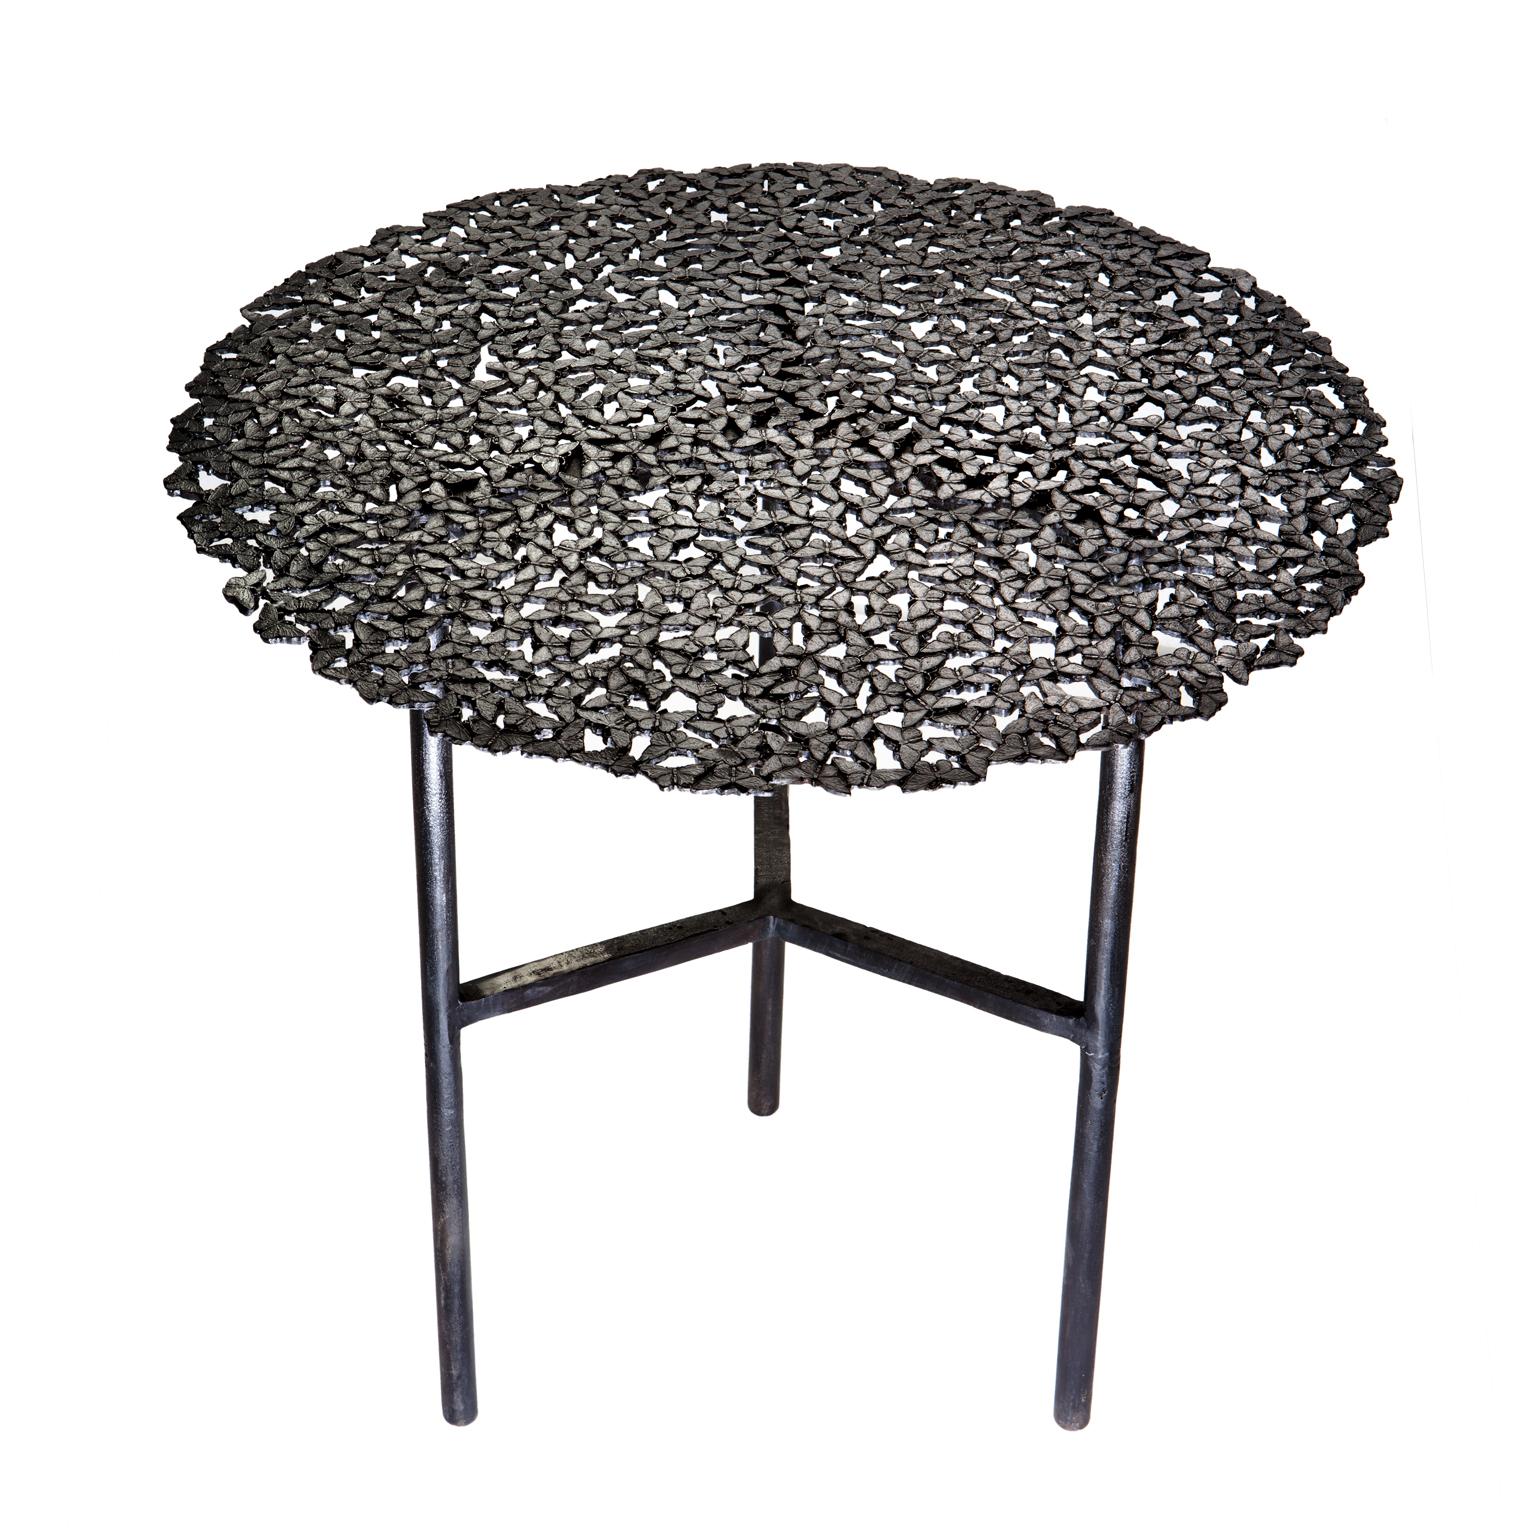 Set Of 2 Jean Bronze Side Tables by Fred and Juul
Dimensions: Ø 60 x H 54 cm.
Materials: Black patinated and white bronze.

Dimensions may vary. Available in black patinated or white bronze finishes. Custom sizes, materials or finishes are available